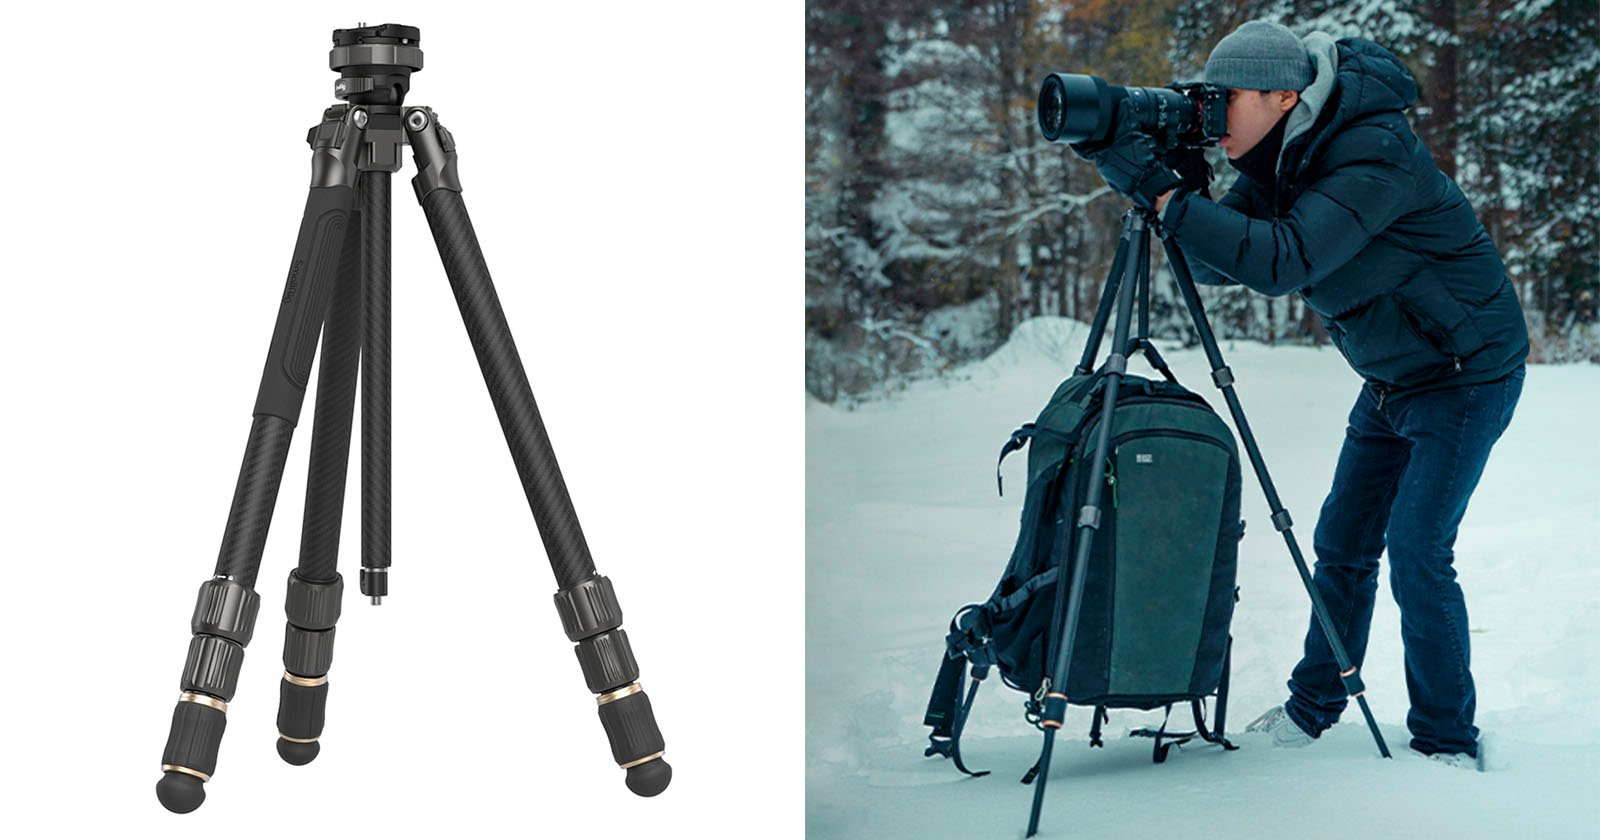 SmallRigs New $240 Carbon Fiber Tripod is for Traveling Photographers